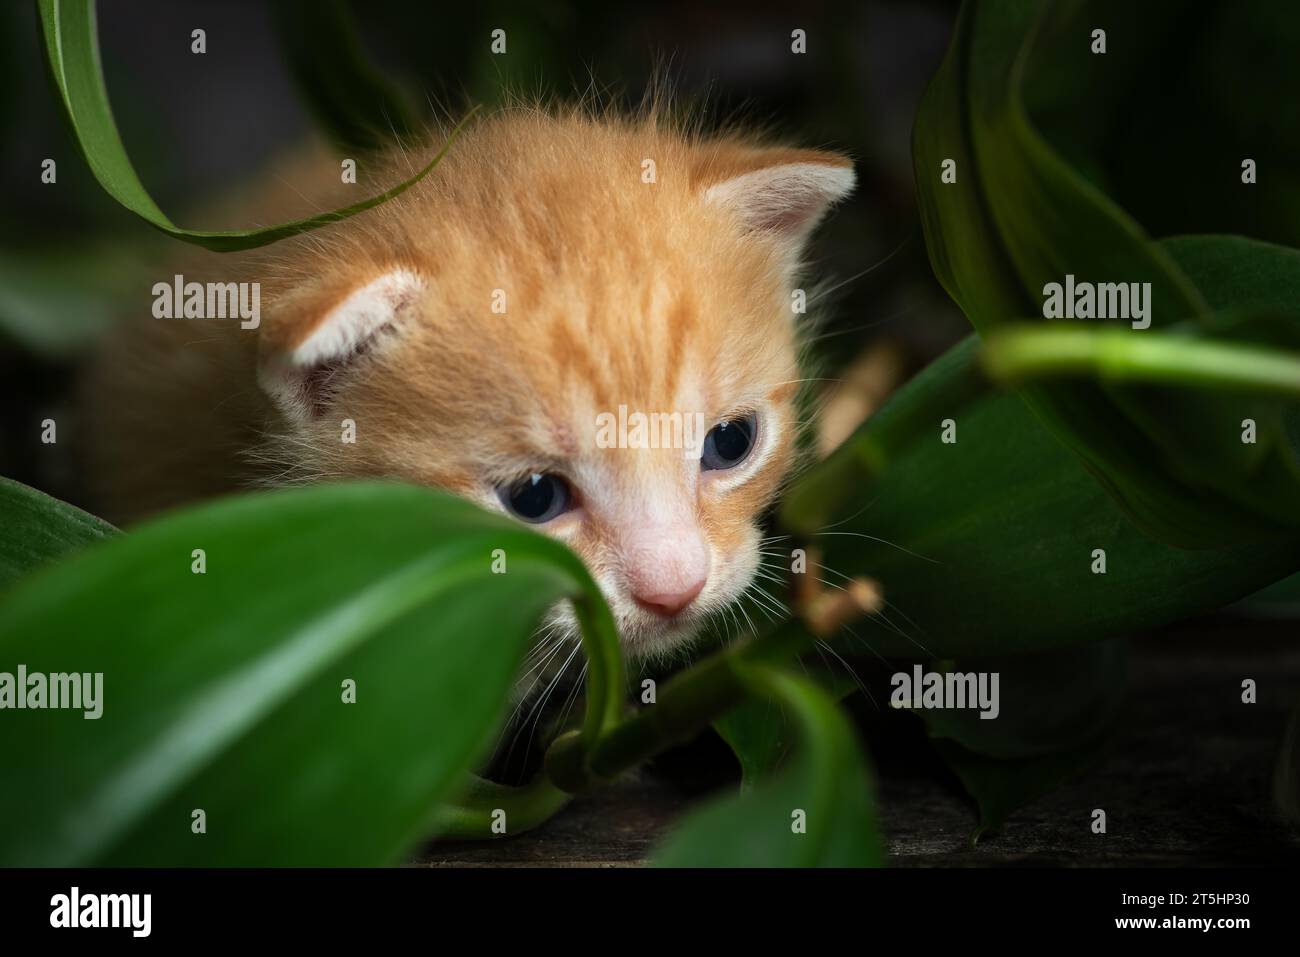 Cute newborn yellow kitten is hiding behind the green leaves of an indoor flower Stock Photo